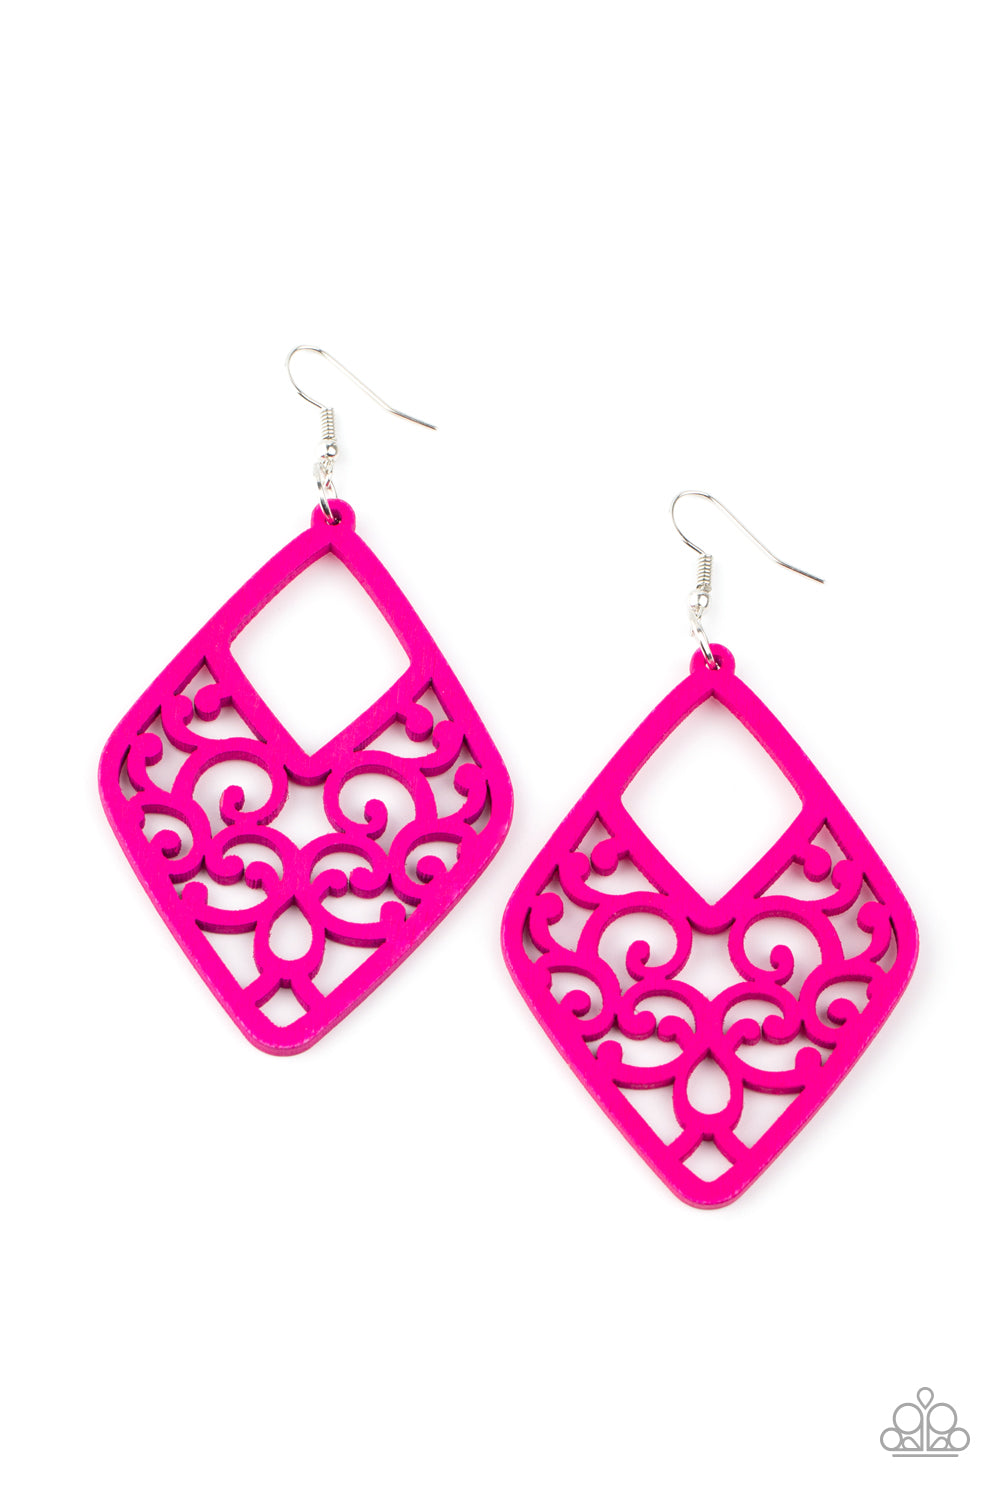 VINE for the Taking - pink - Paparazzi earrings